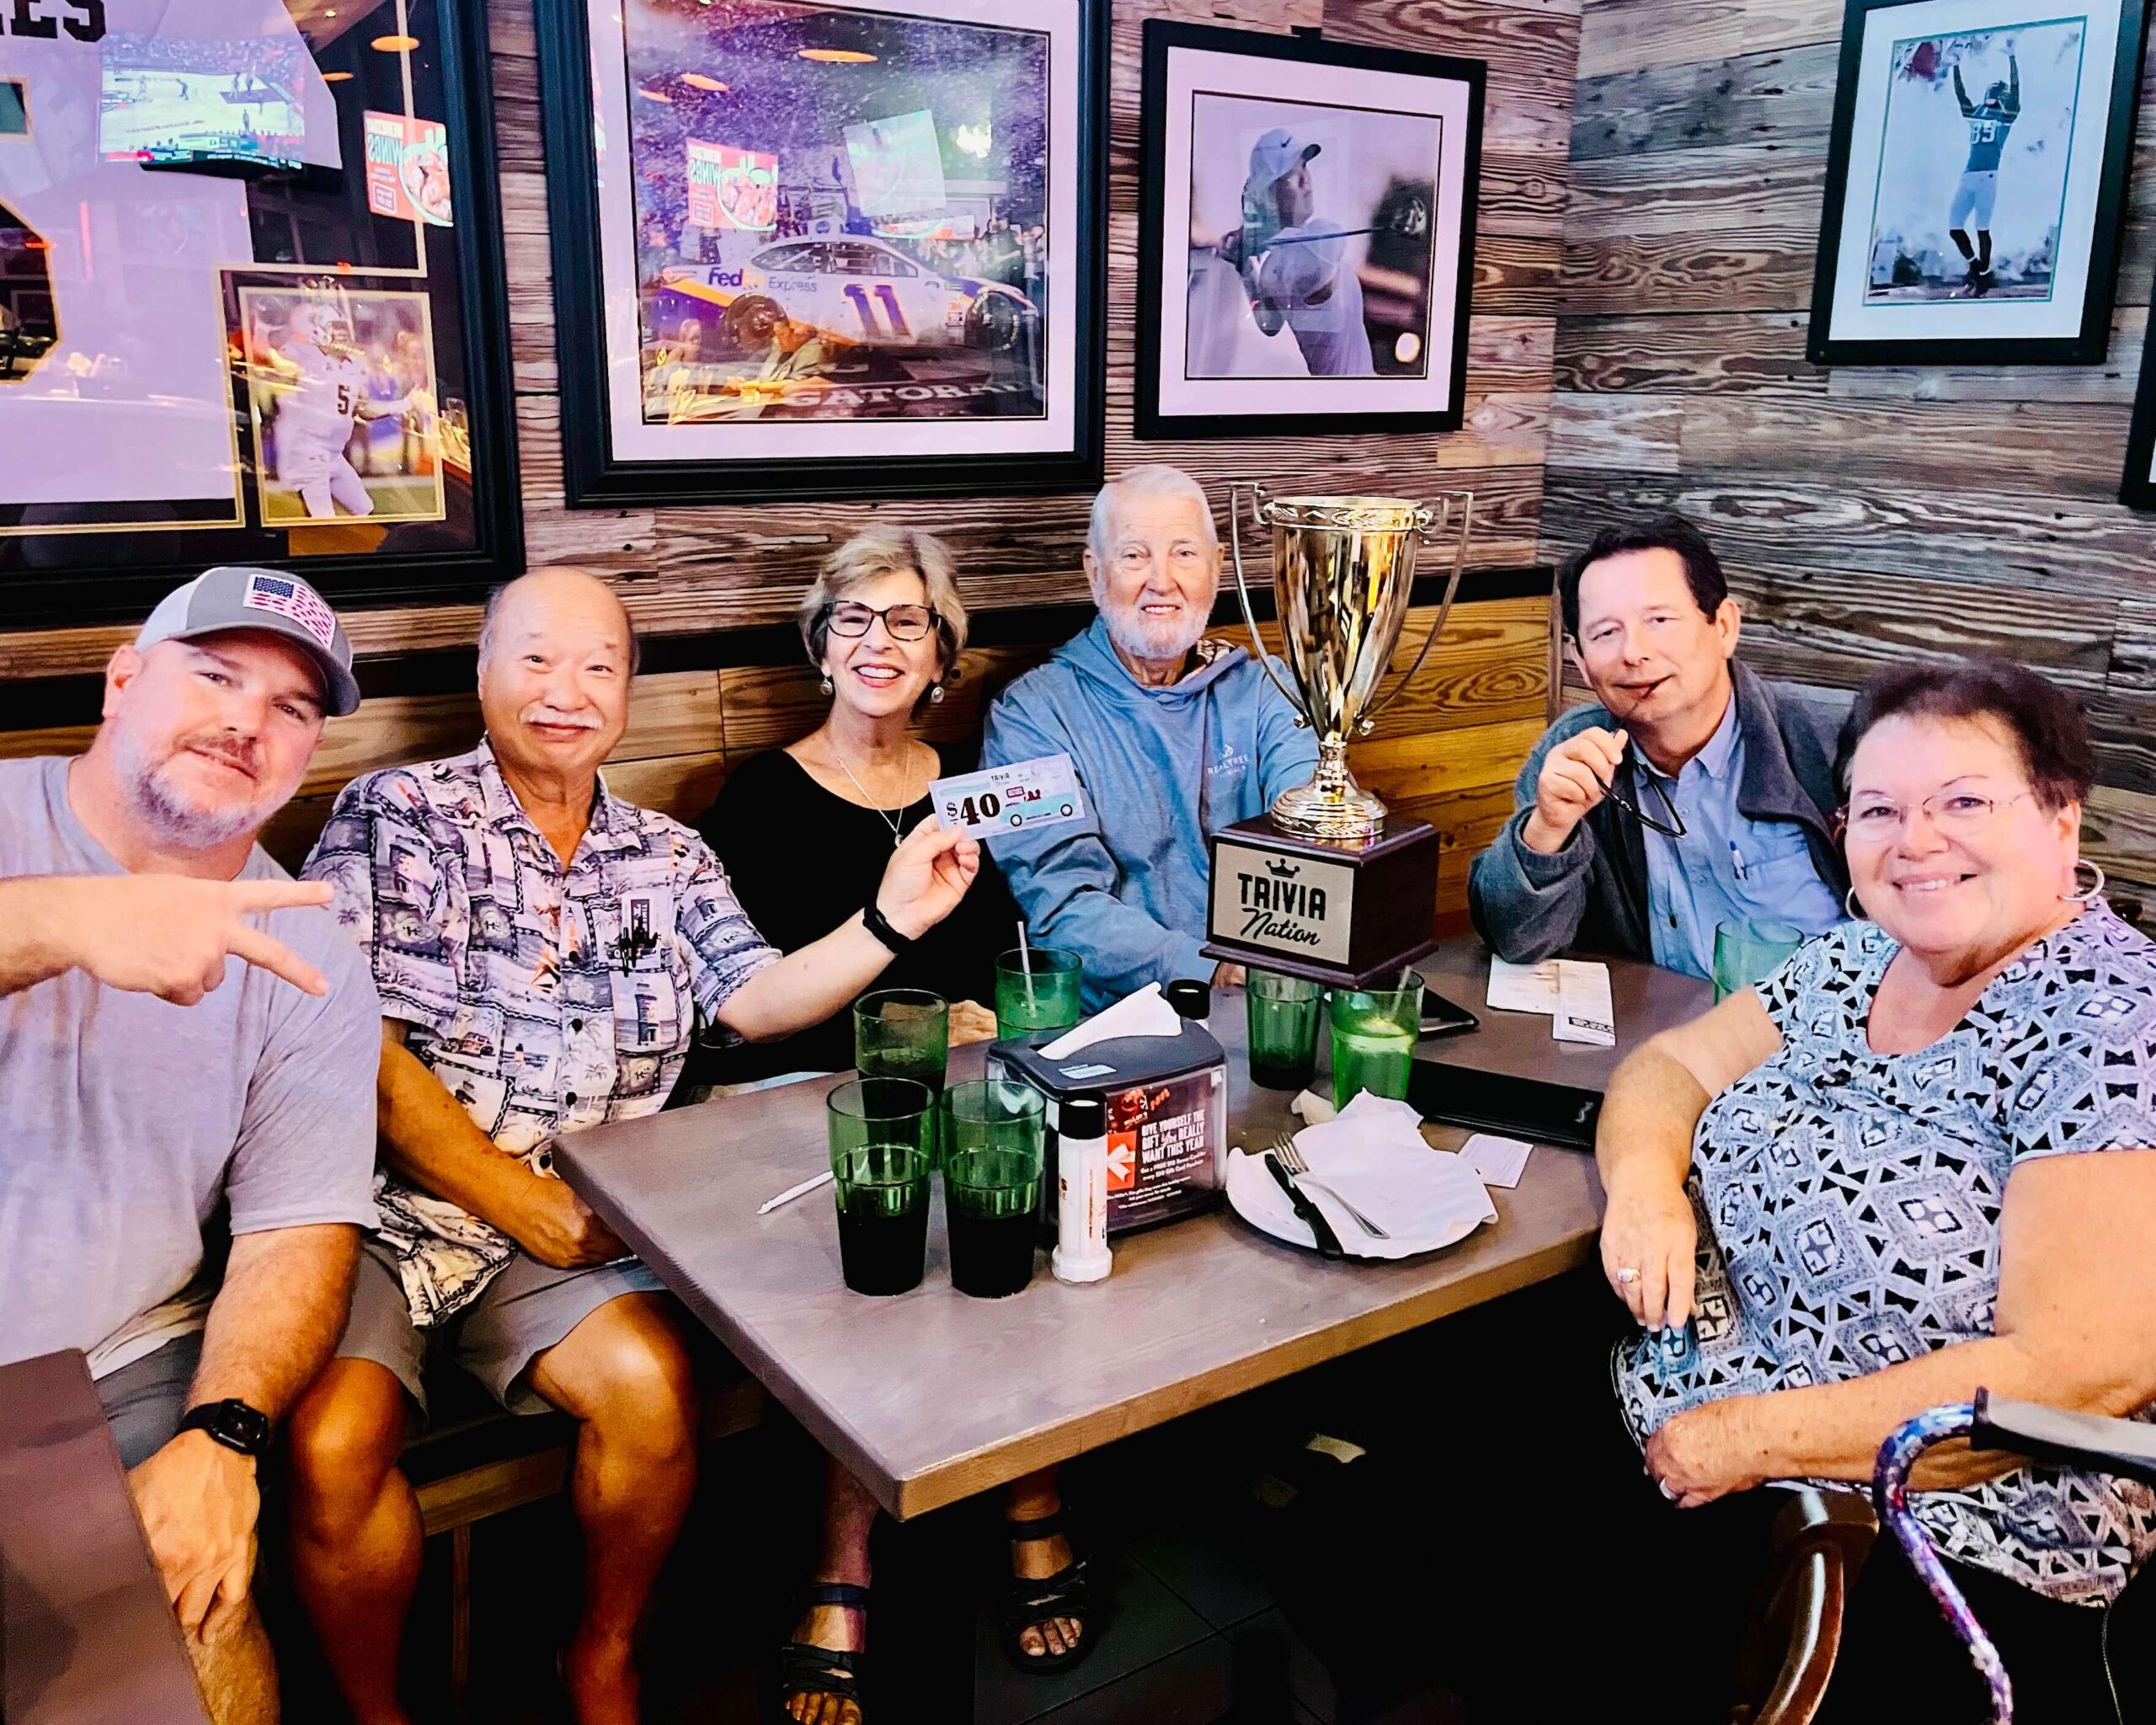 Miller's Ale House Daytona Beach FL 32117 trivia night: group of adults seated around a table all smiling with the trivia host while one man in the back holds up a Trivia Nation trophy and with framed photos of sports scenes on the wall behind them